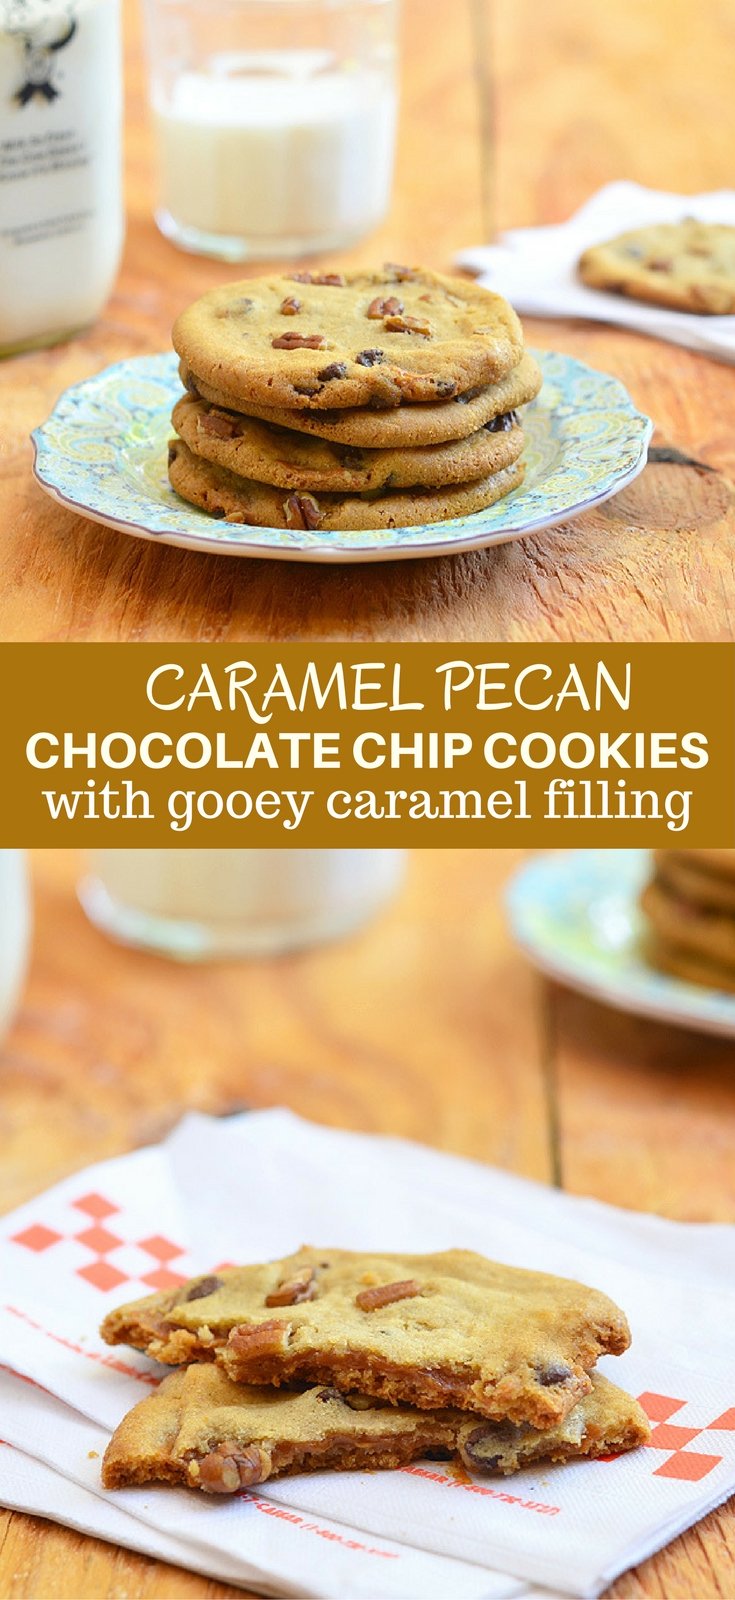 Caramel Pecan Chocolate Chip Cookies are crisp, buttery and deliciously gooey with soft, caramel centers. Bake a big batch, these are sure to be everyone's favorite treat!